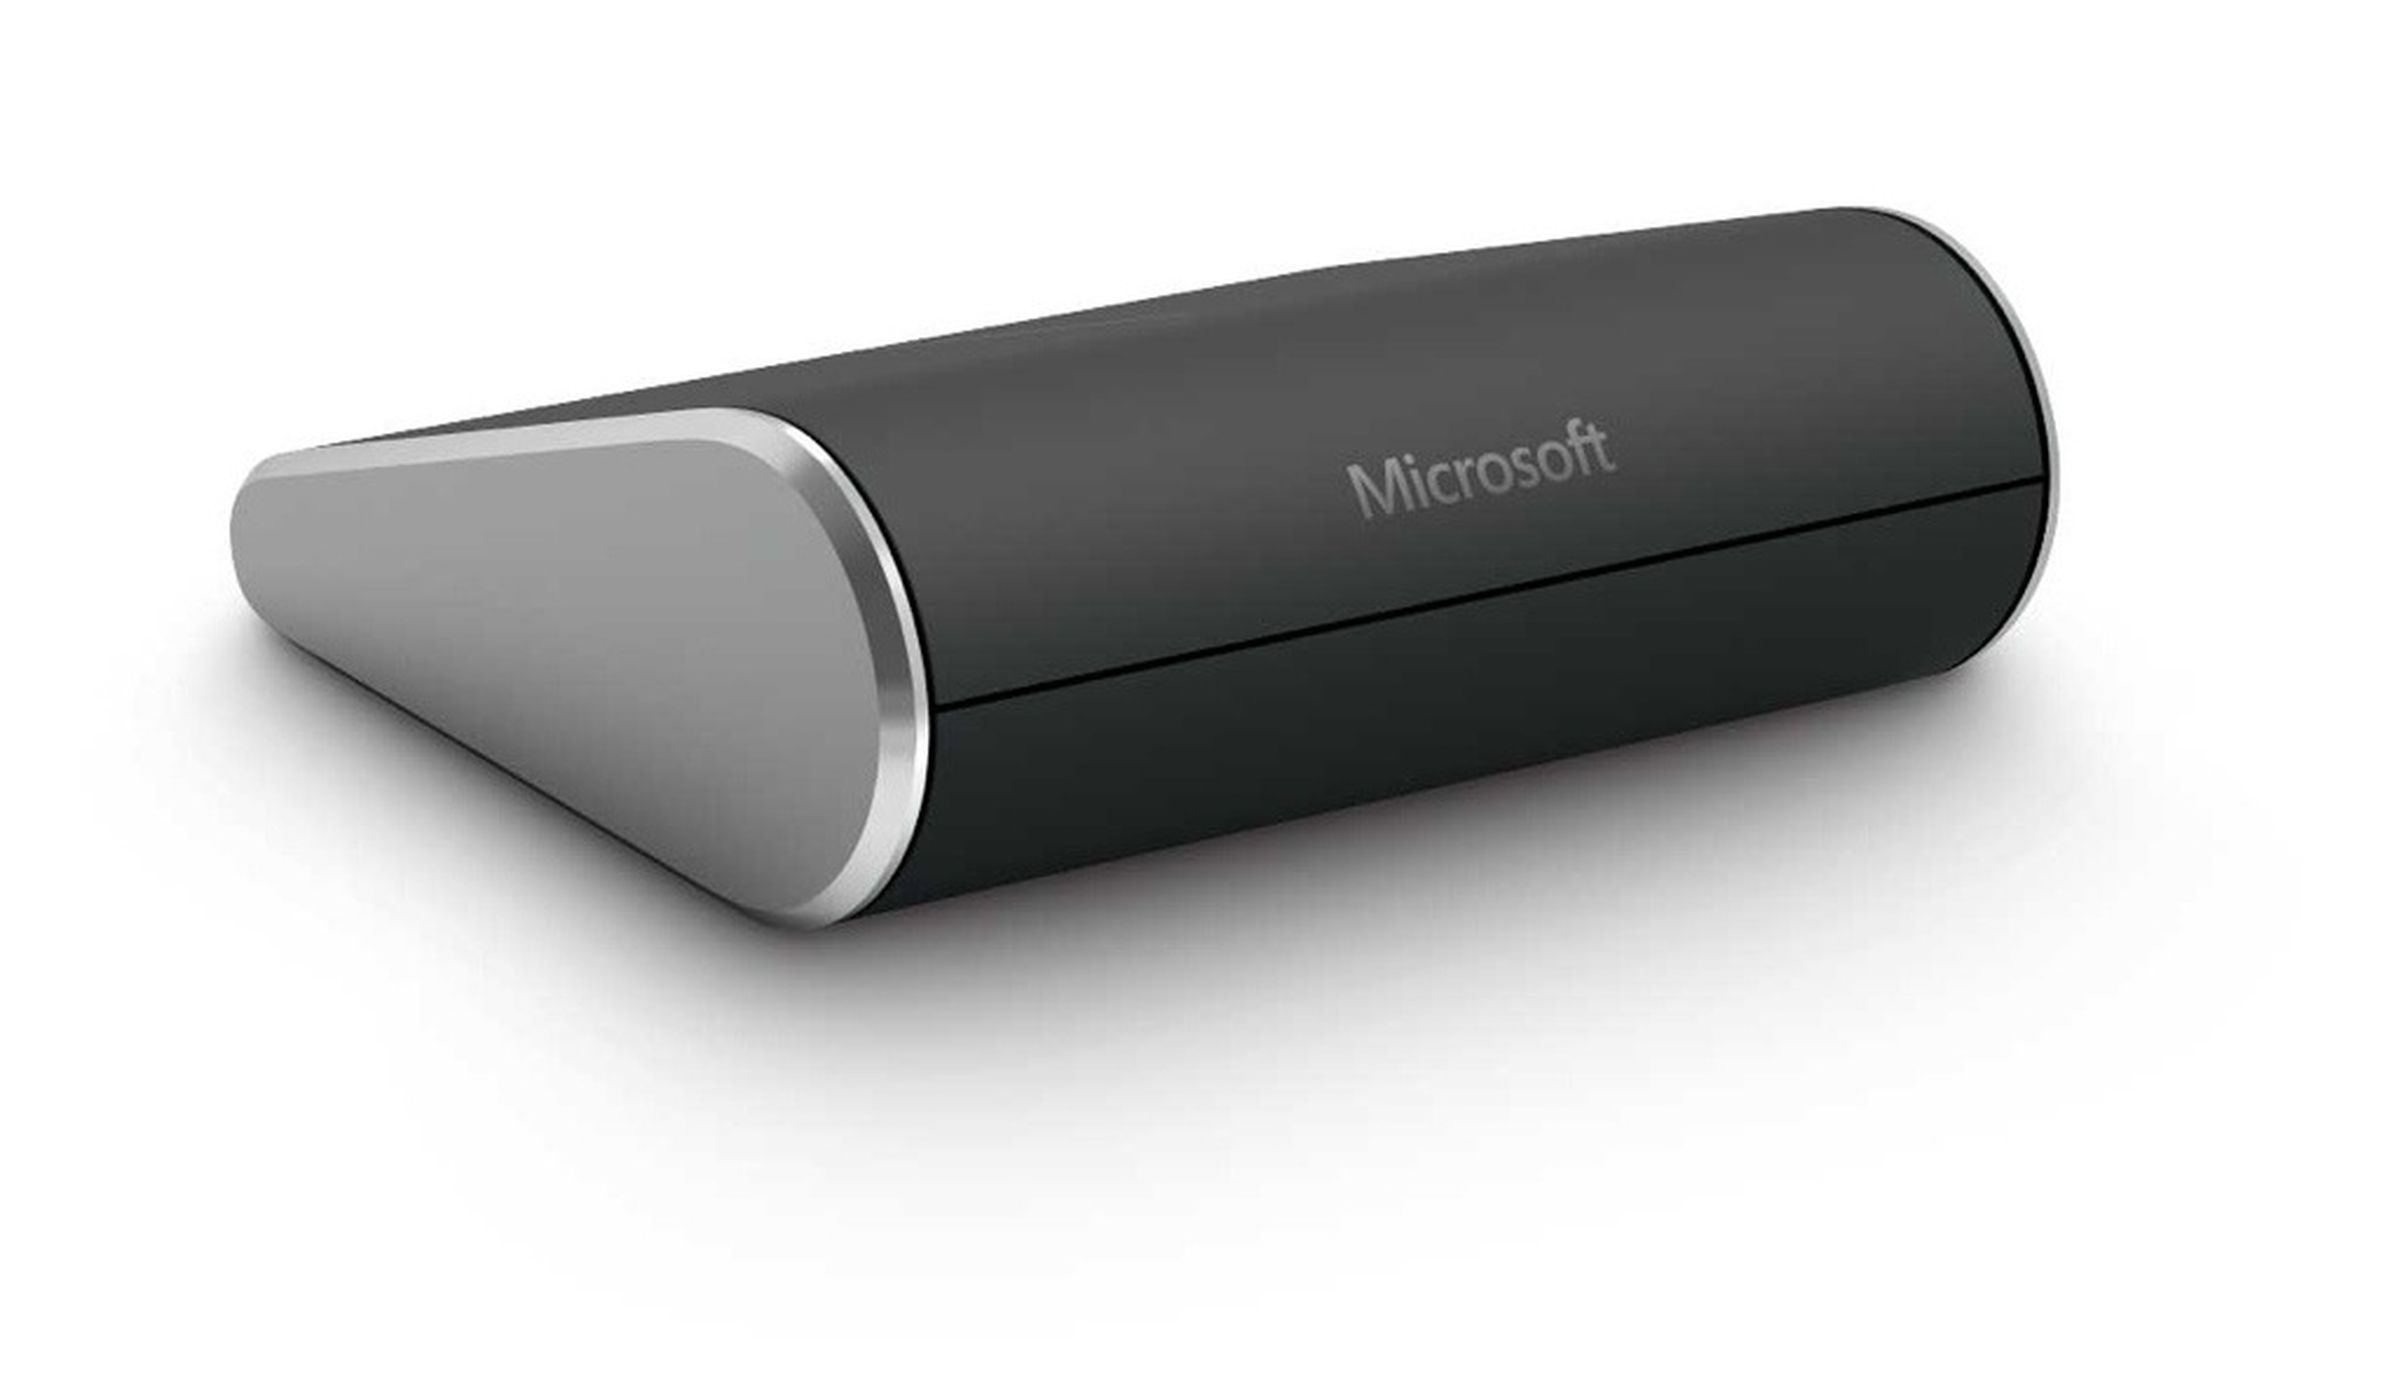 Microsoft Wedge Touch mouse official photos